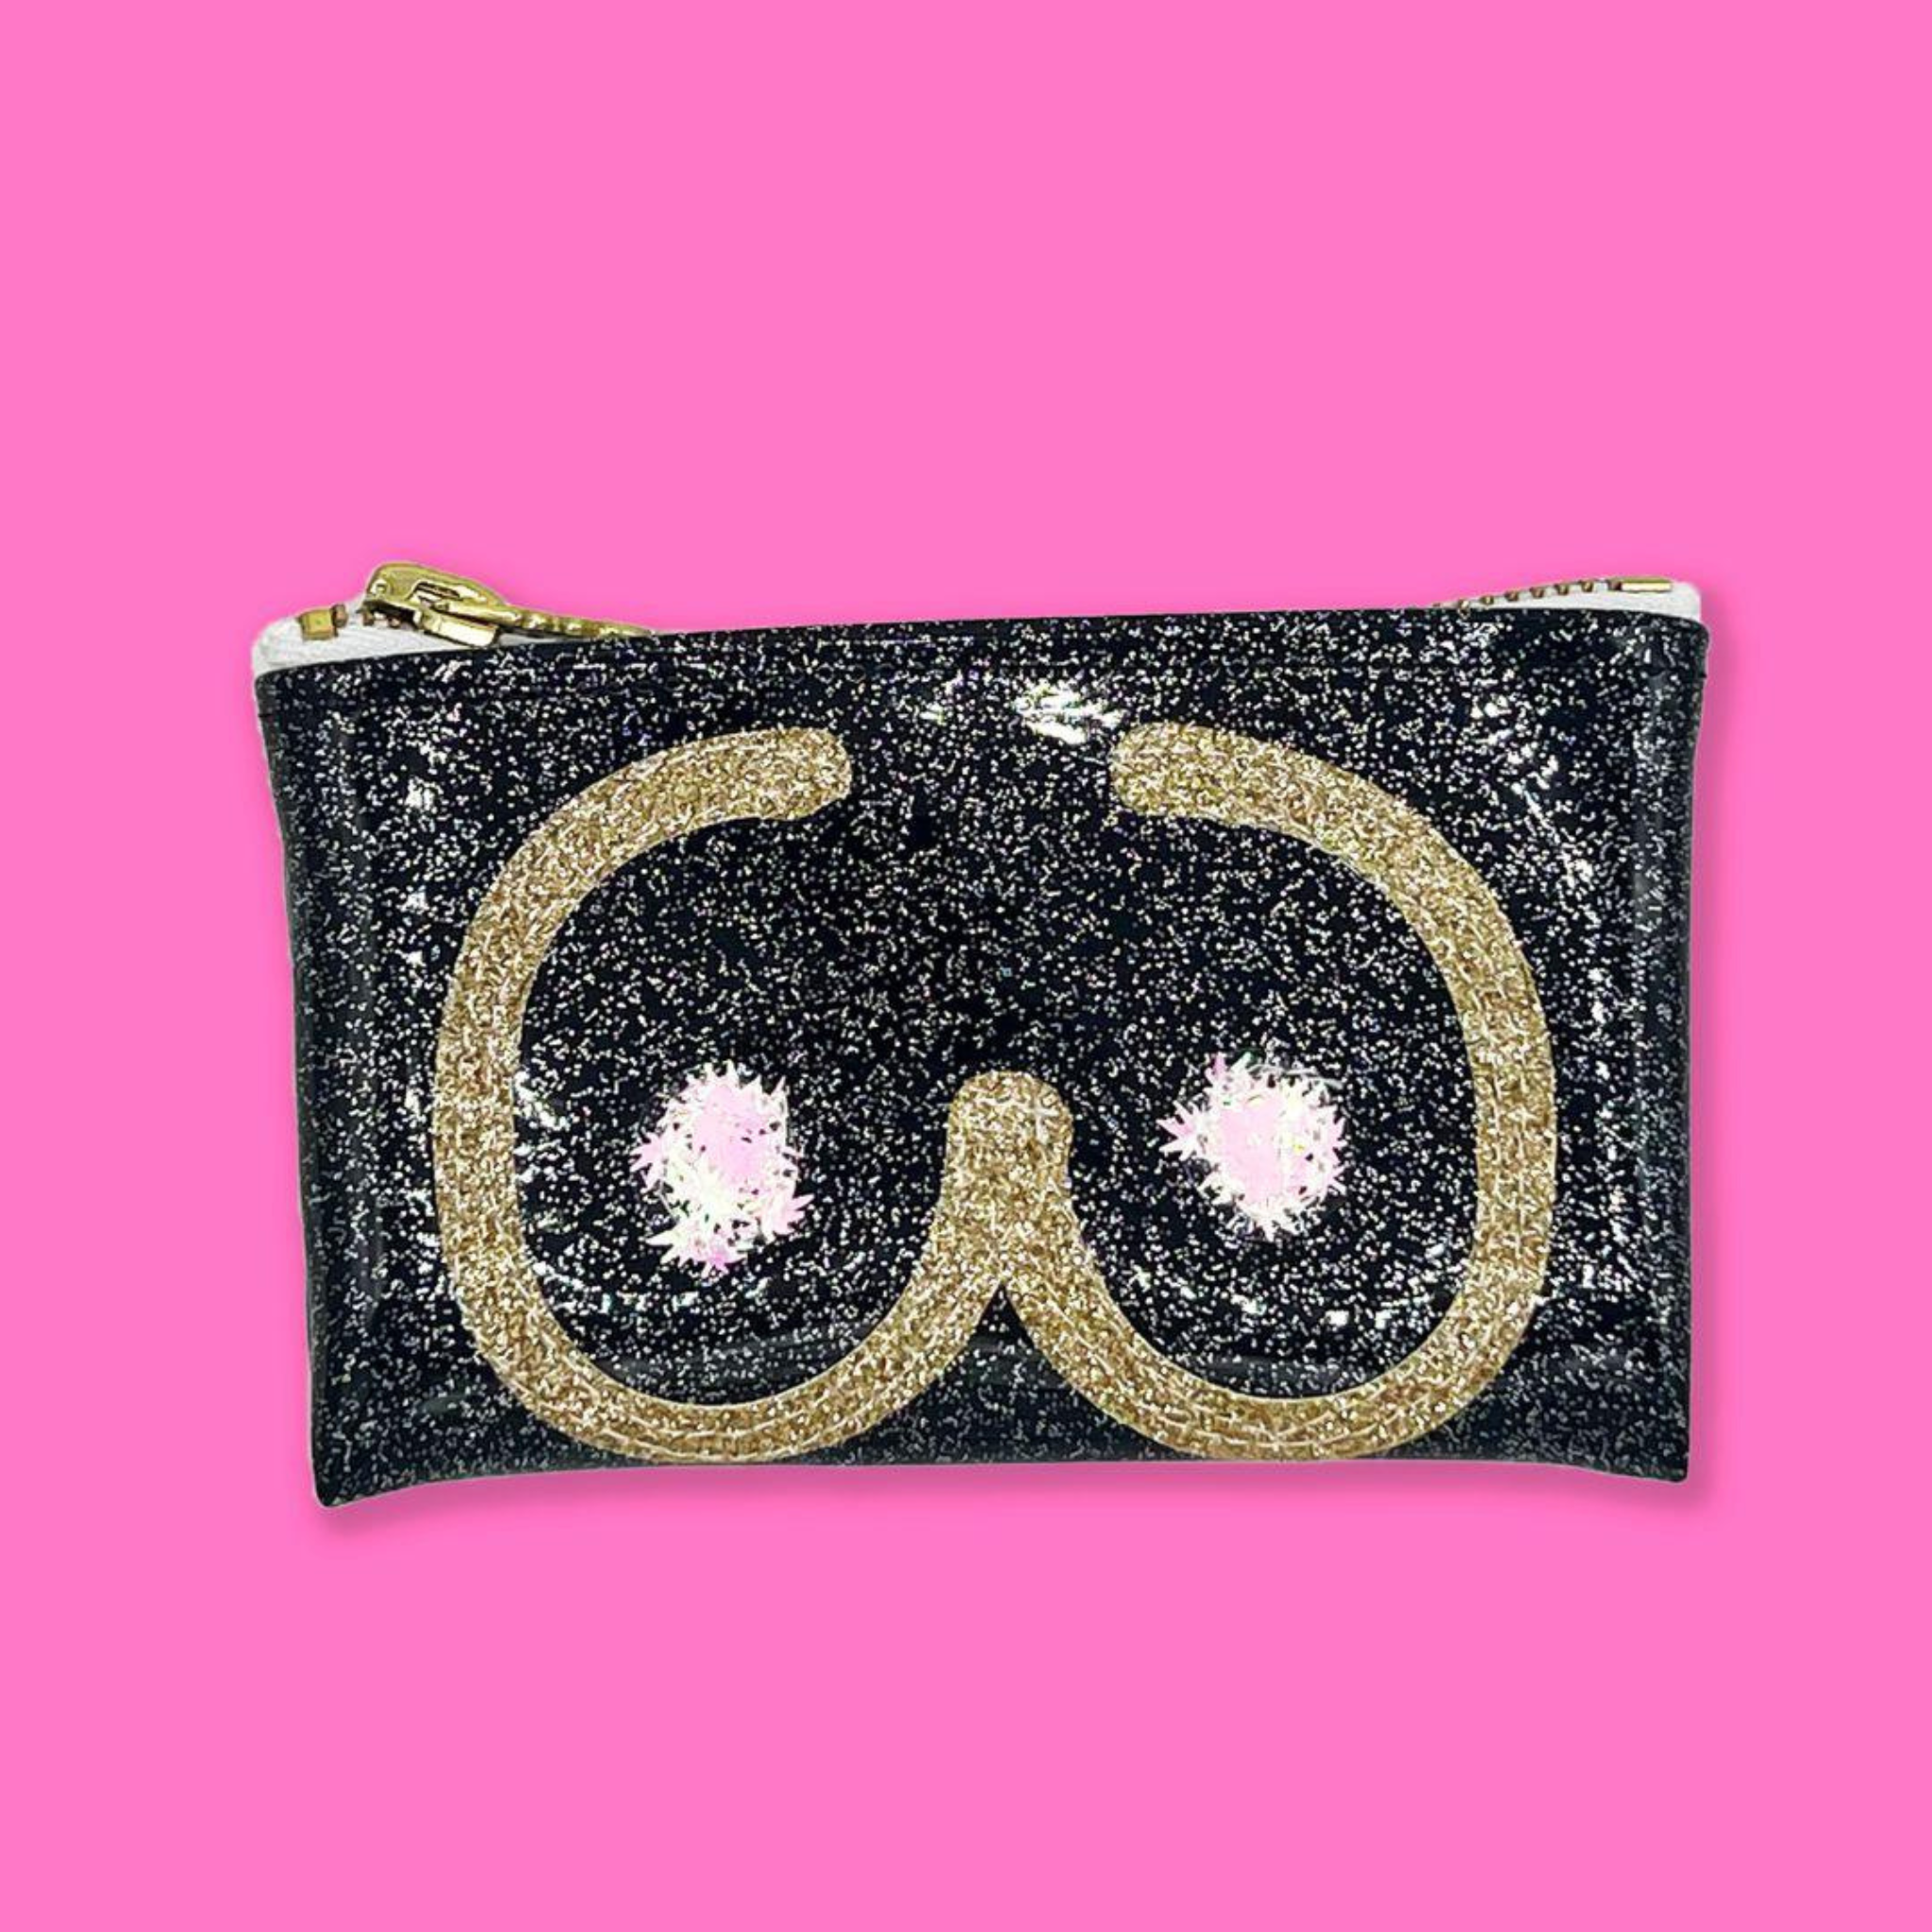 Black glittery keychain clutch with gold boobie silhouette and pink leaf confetti on a pink background.